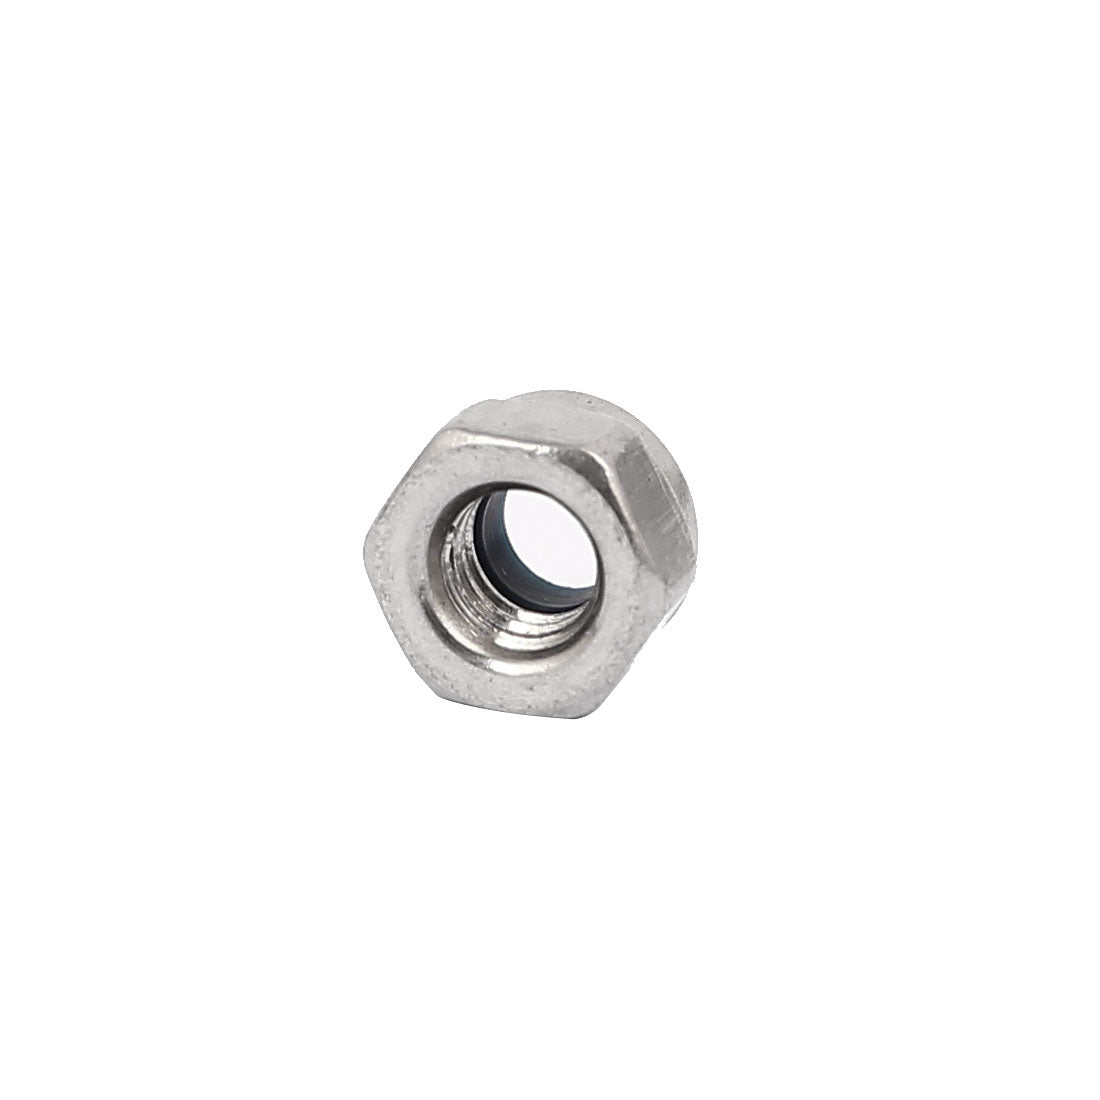 uxcell Uxcell M6 x 1mm 304 Stainless Steel Nylon Insert Hex Lock Locking Nut 50PCS